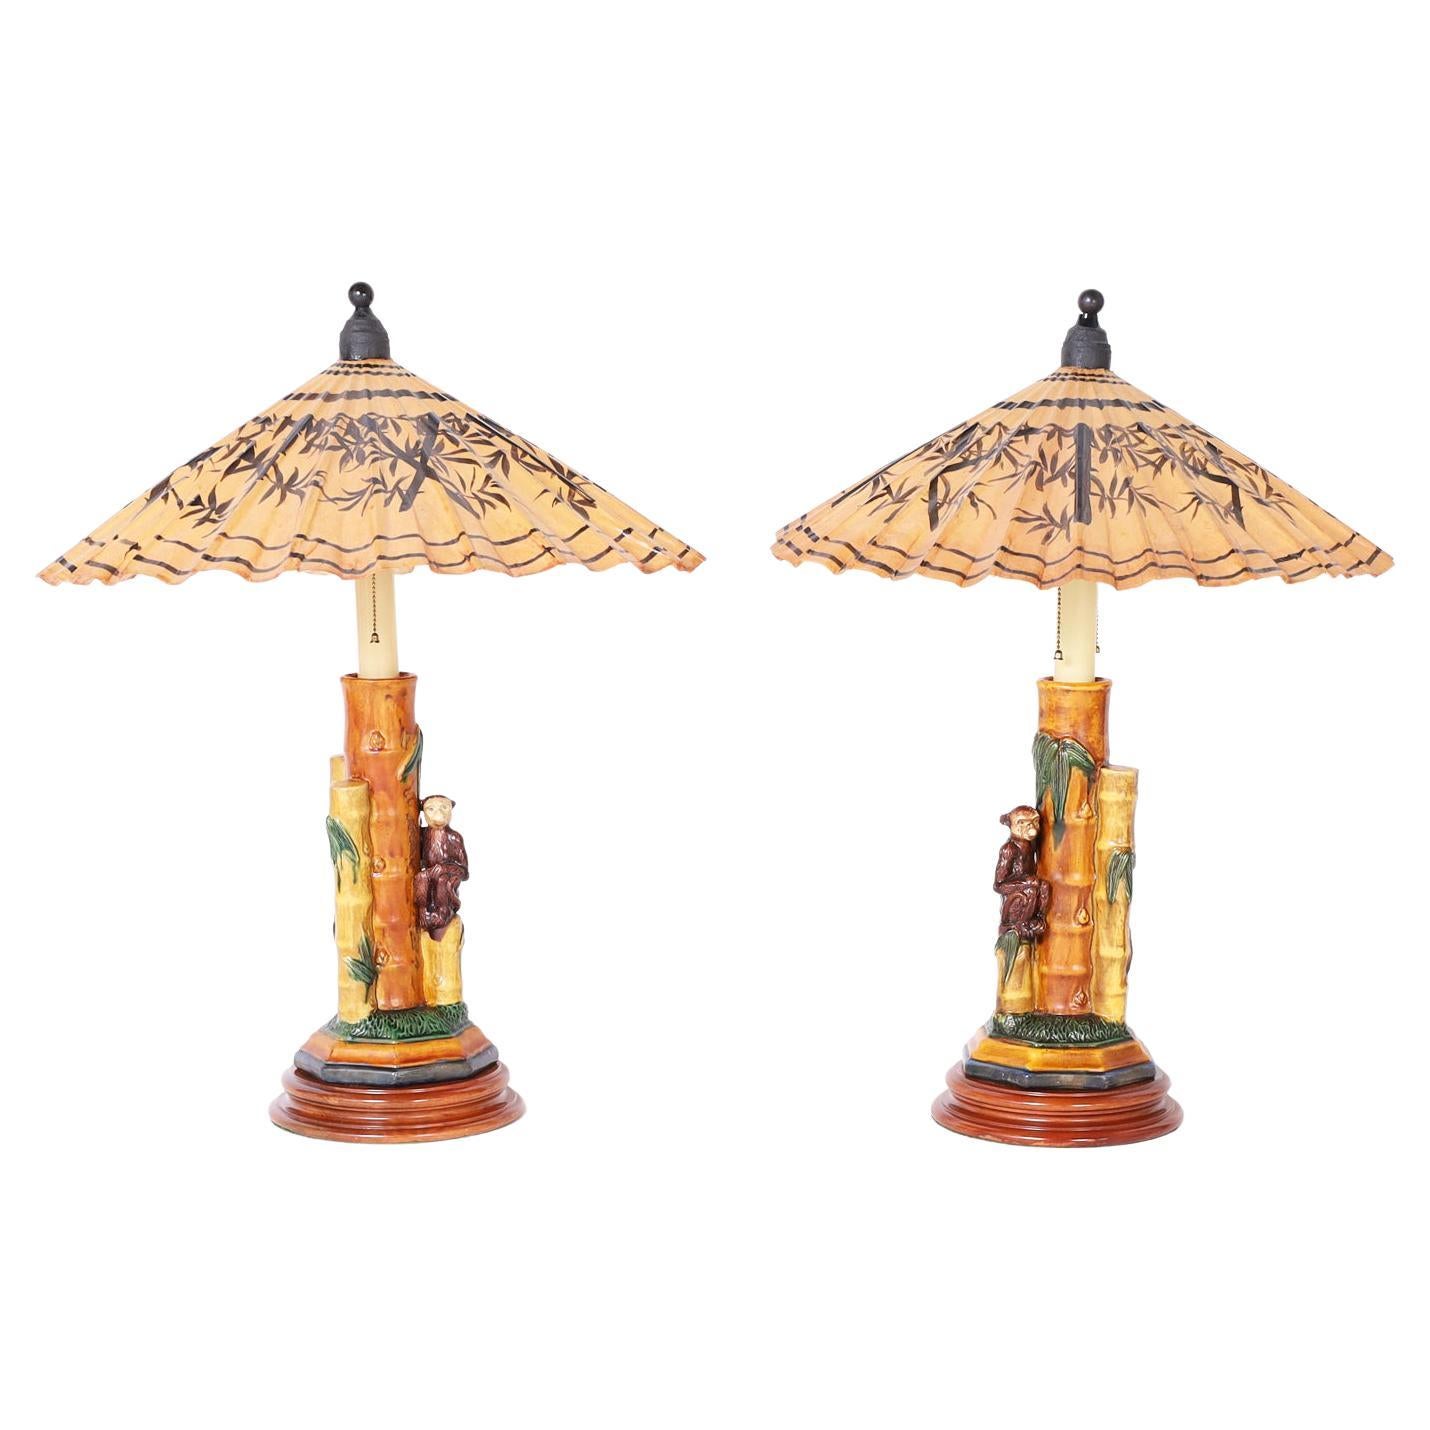 Pair of Porcelain Table Lamps with Monkeys and Umbrella Shades For Sale